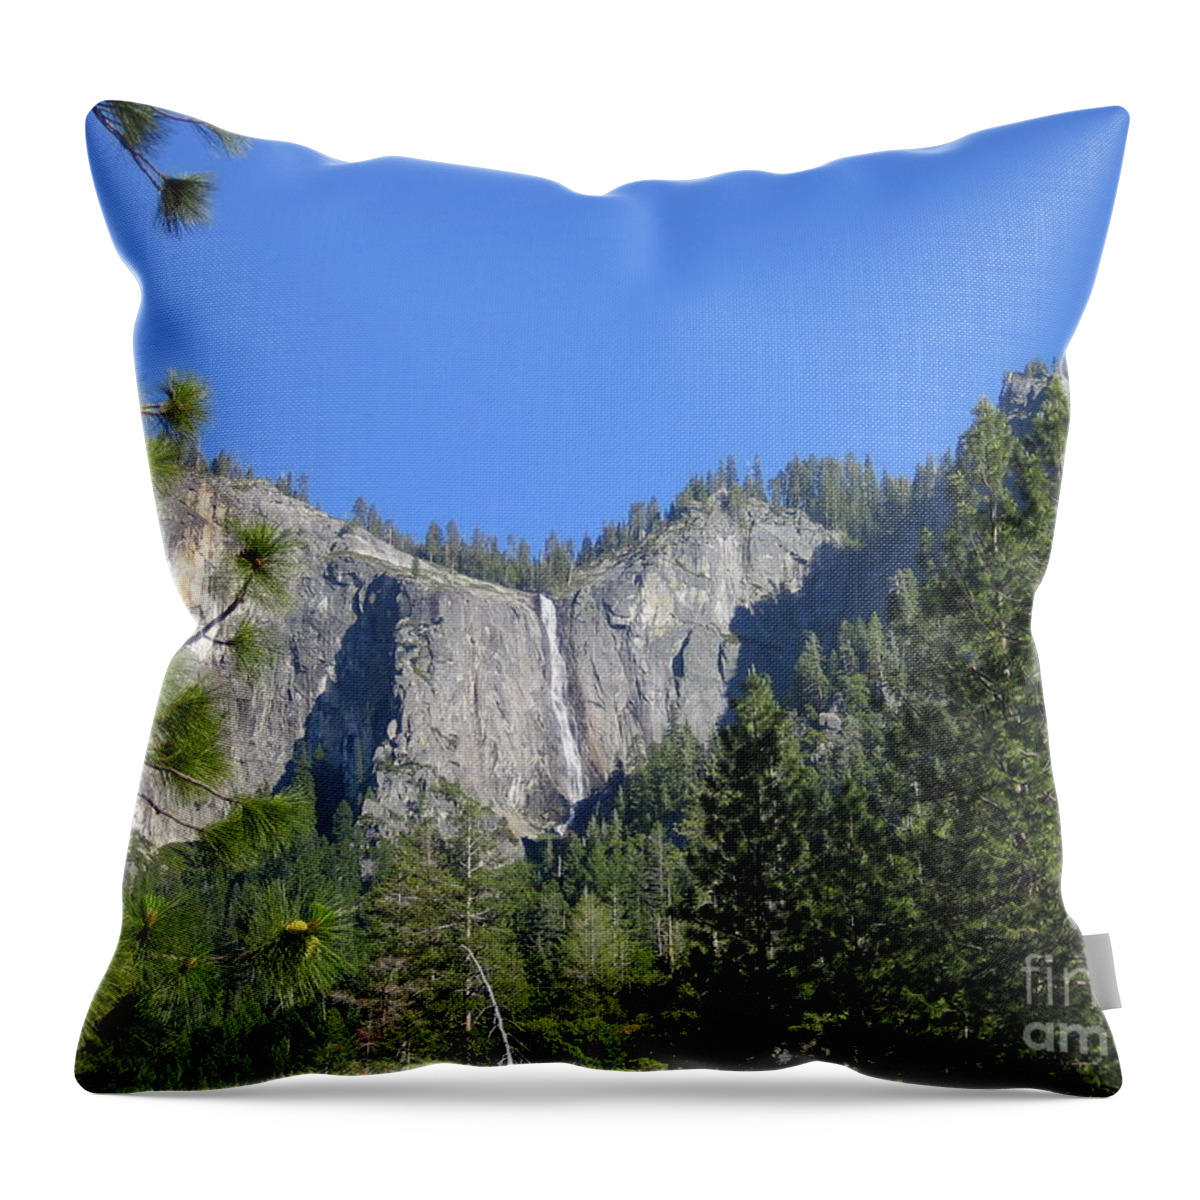 Yosemite Throw Pillow featuring the photograph Yosemite National Park Waterfall and Mountain Range with Trees in the Foreground by John Shiron